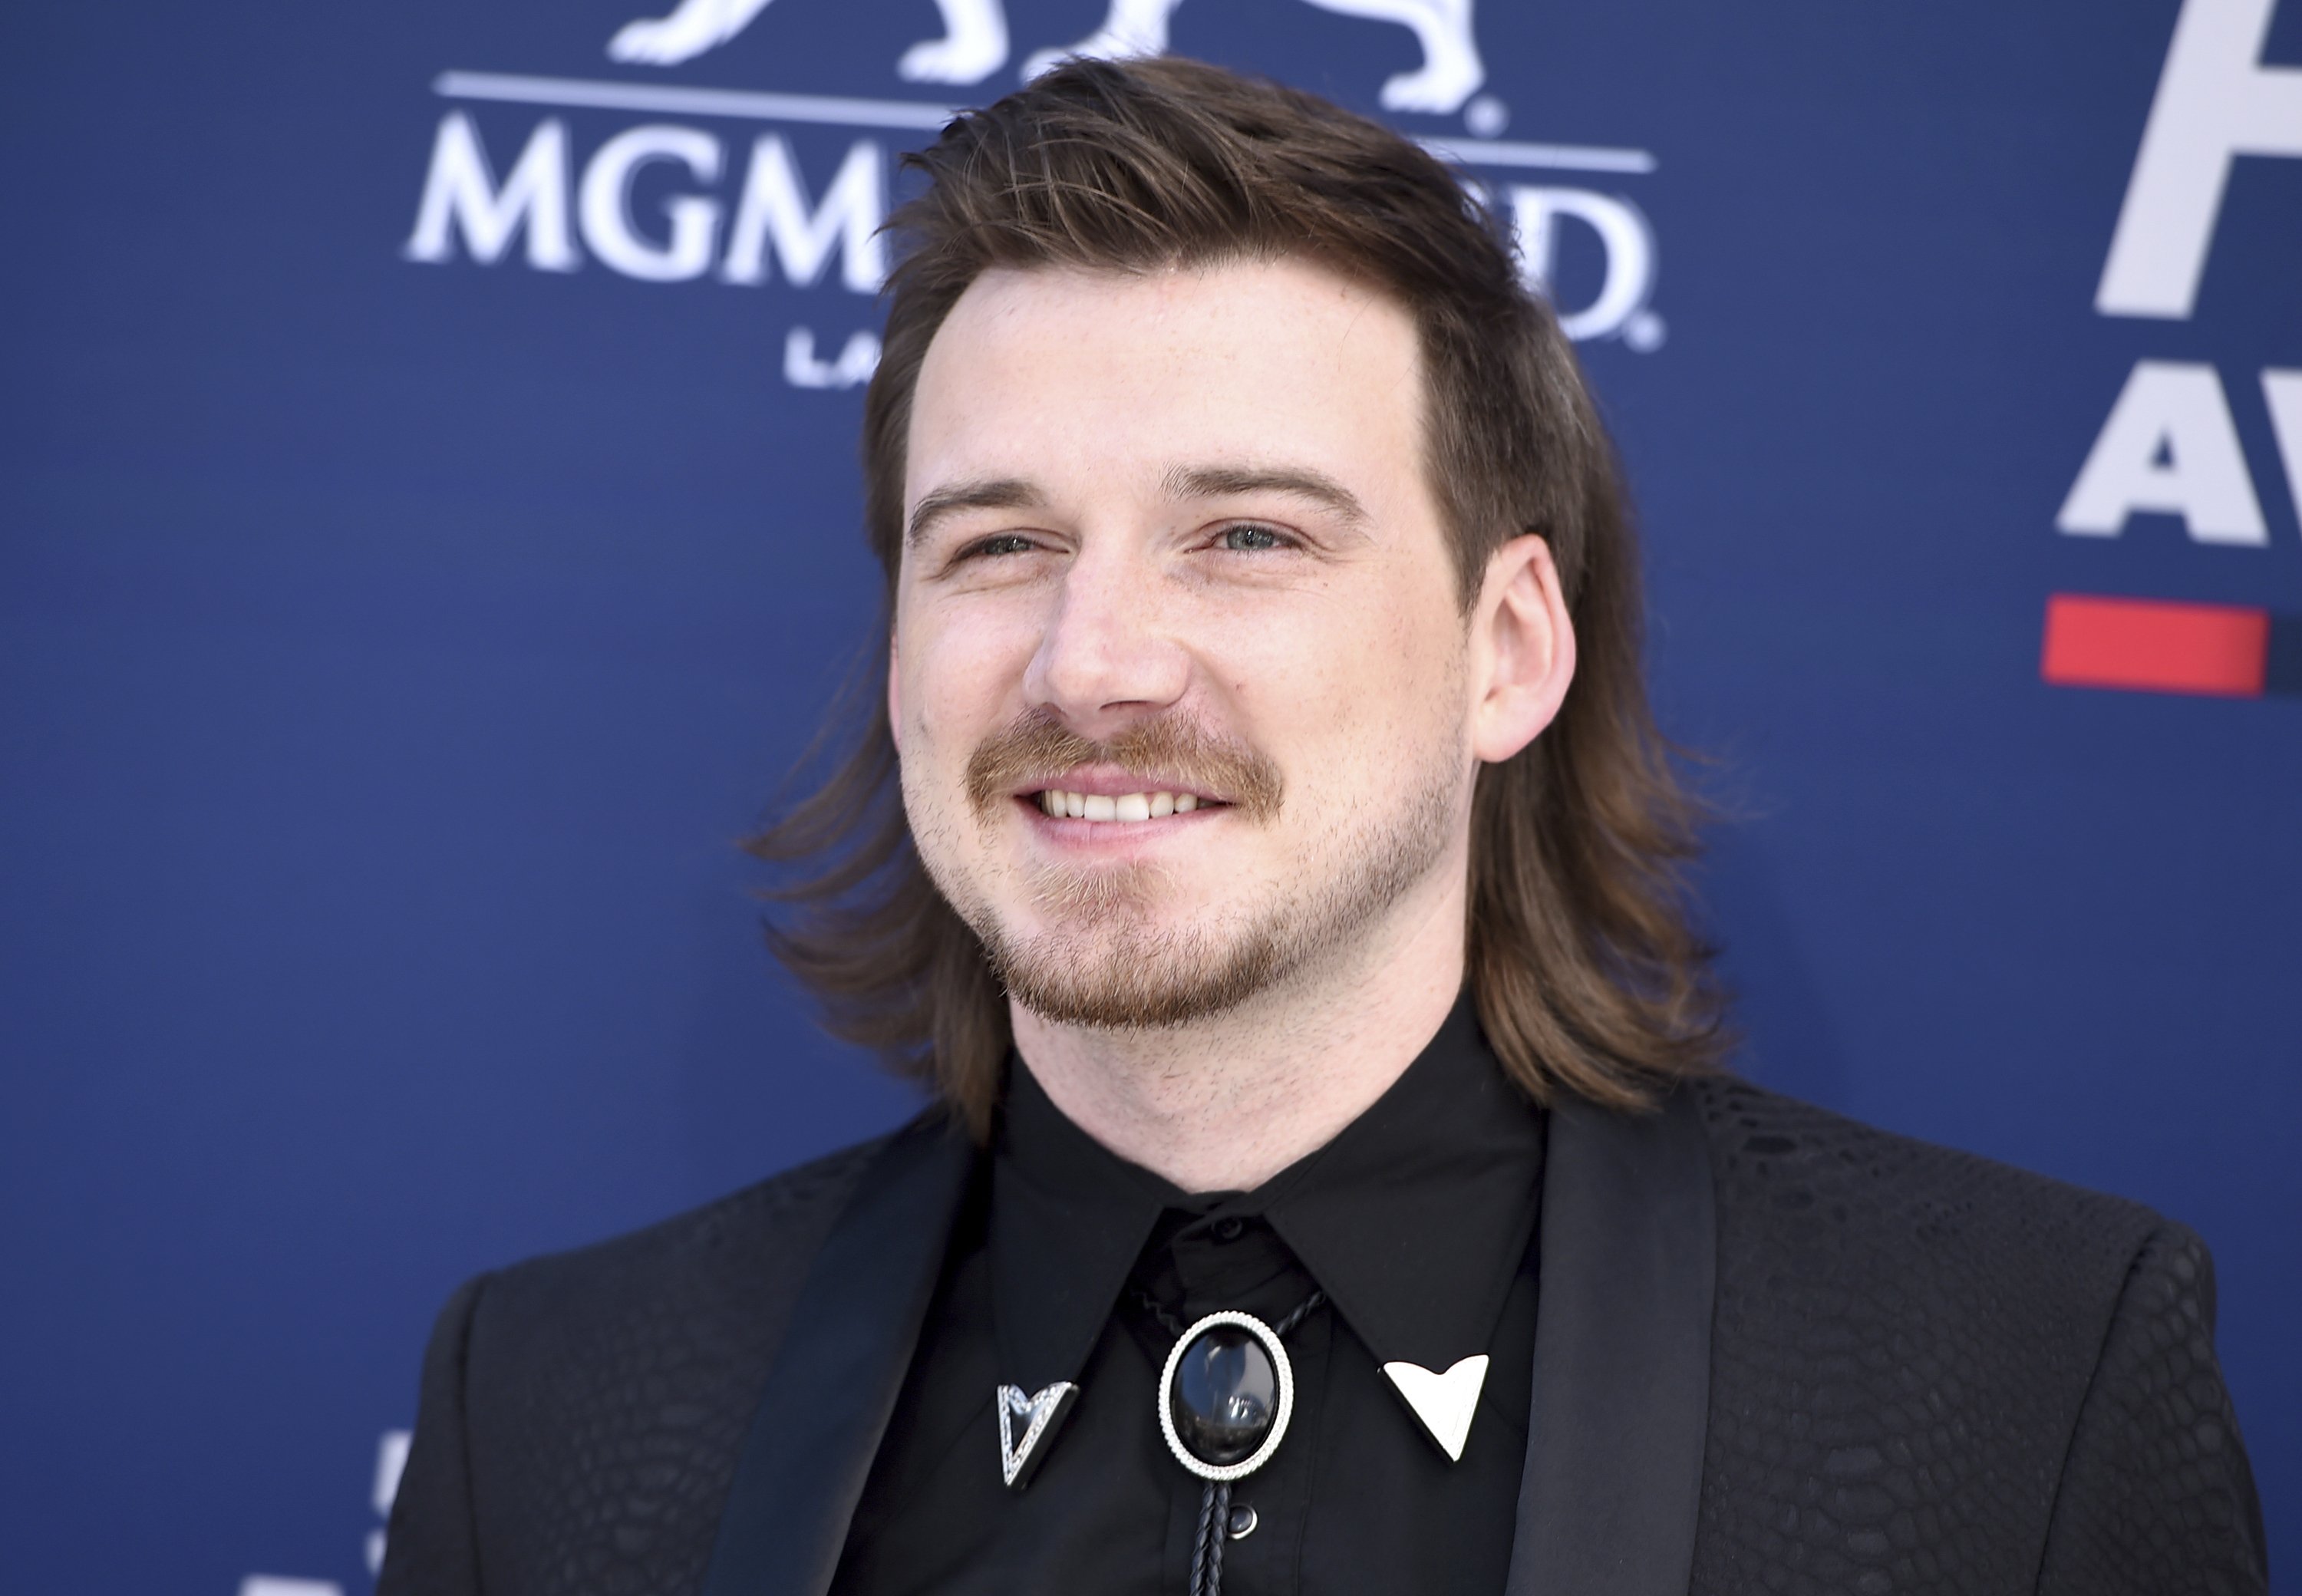 Album sales are rising for Morgan Wallen after racist comments